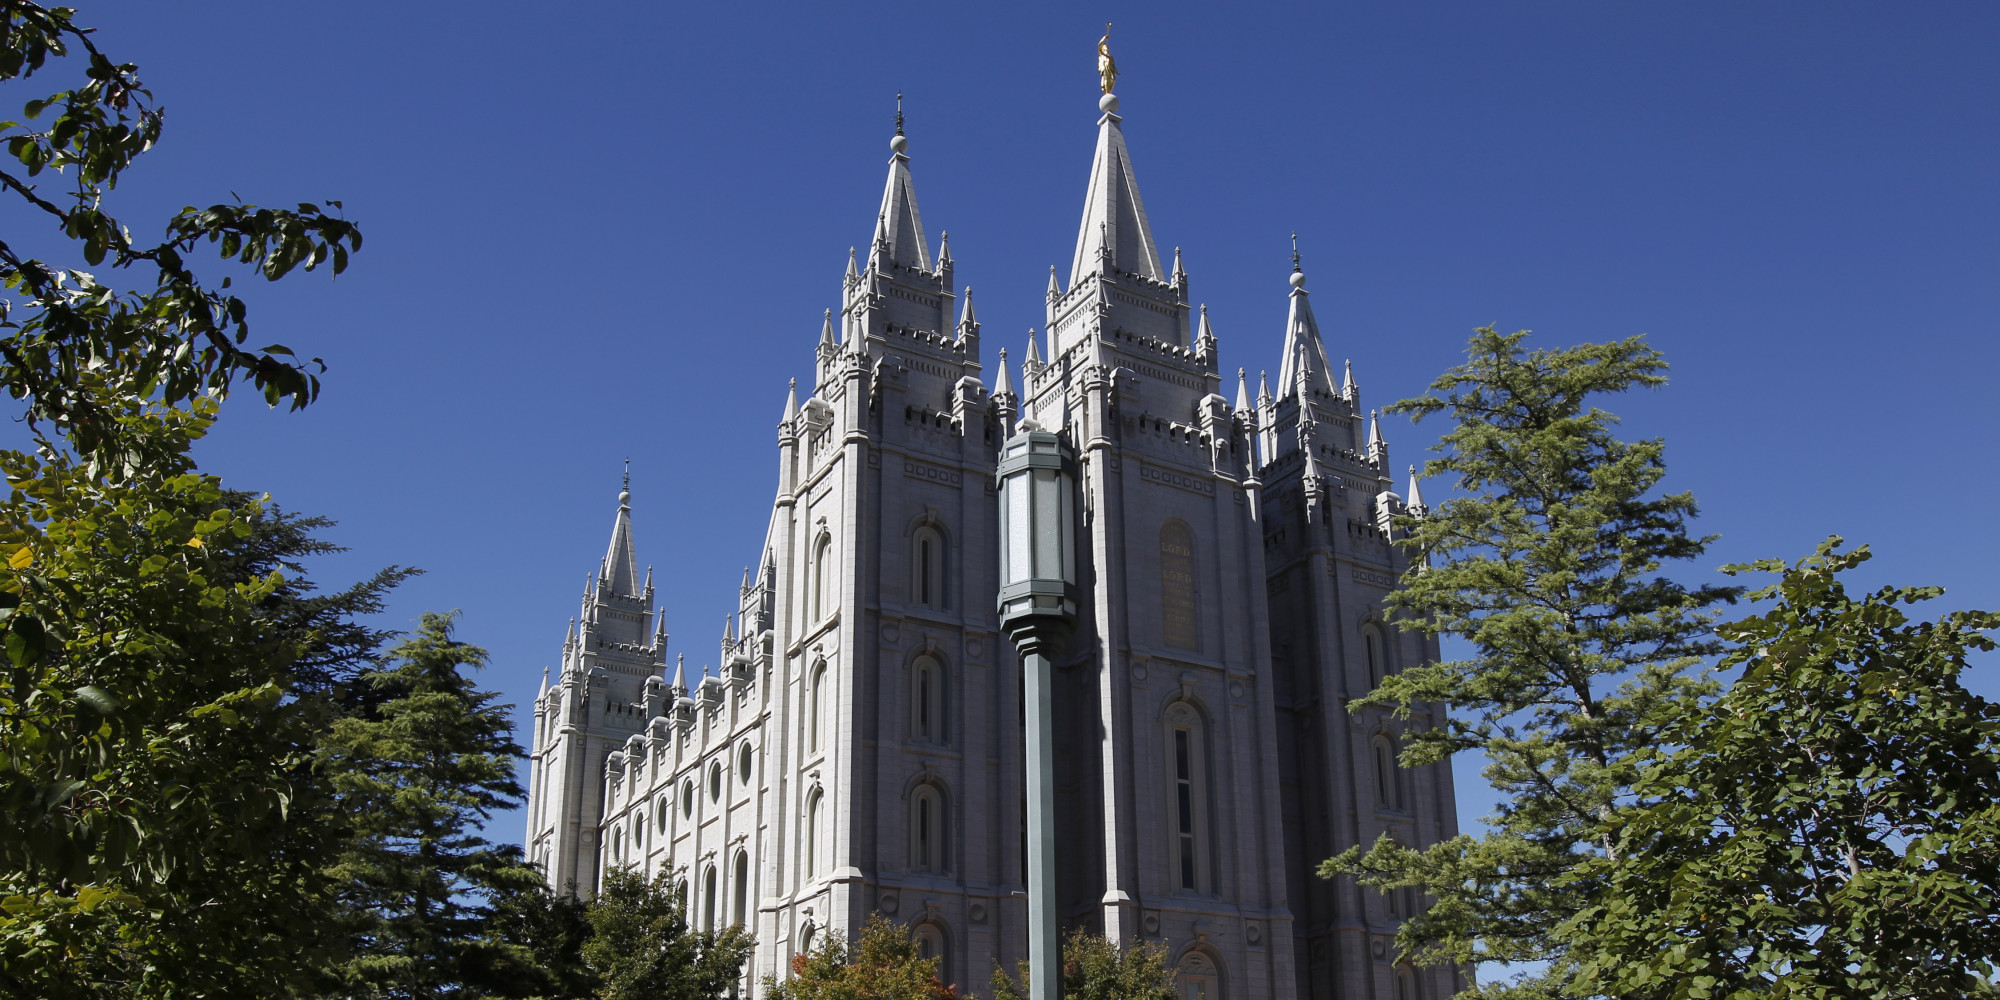 Why Does It Matter If You Are Excommunicated From the Mormon Church